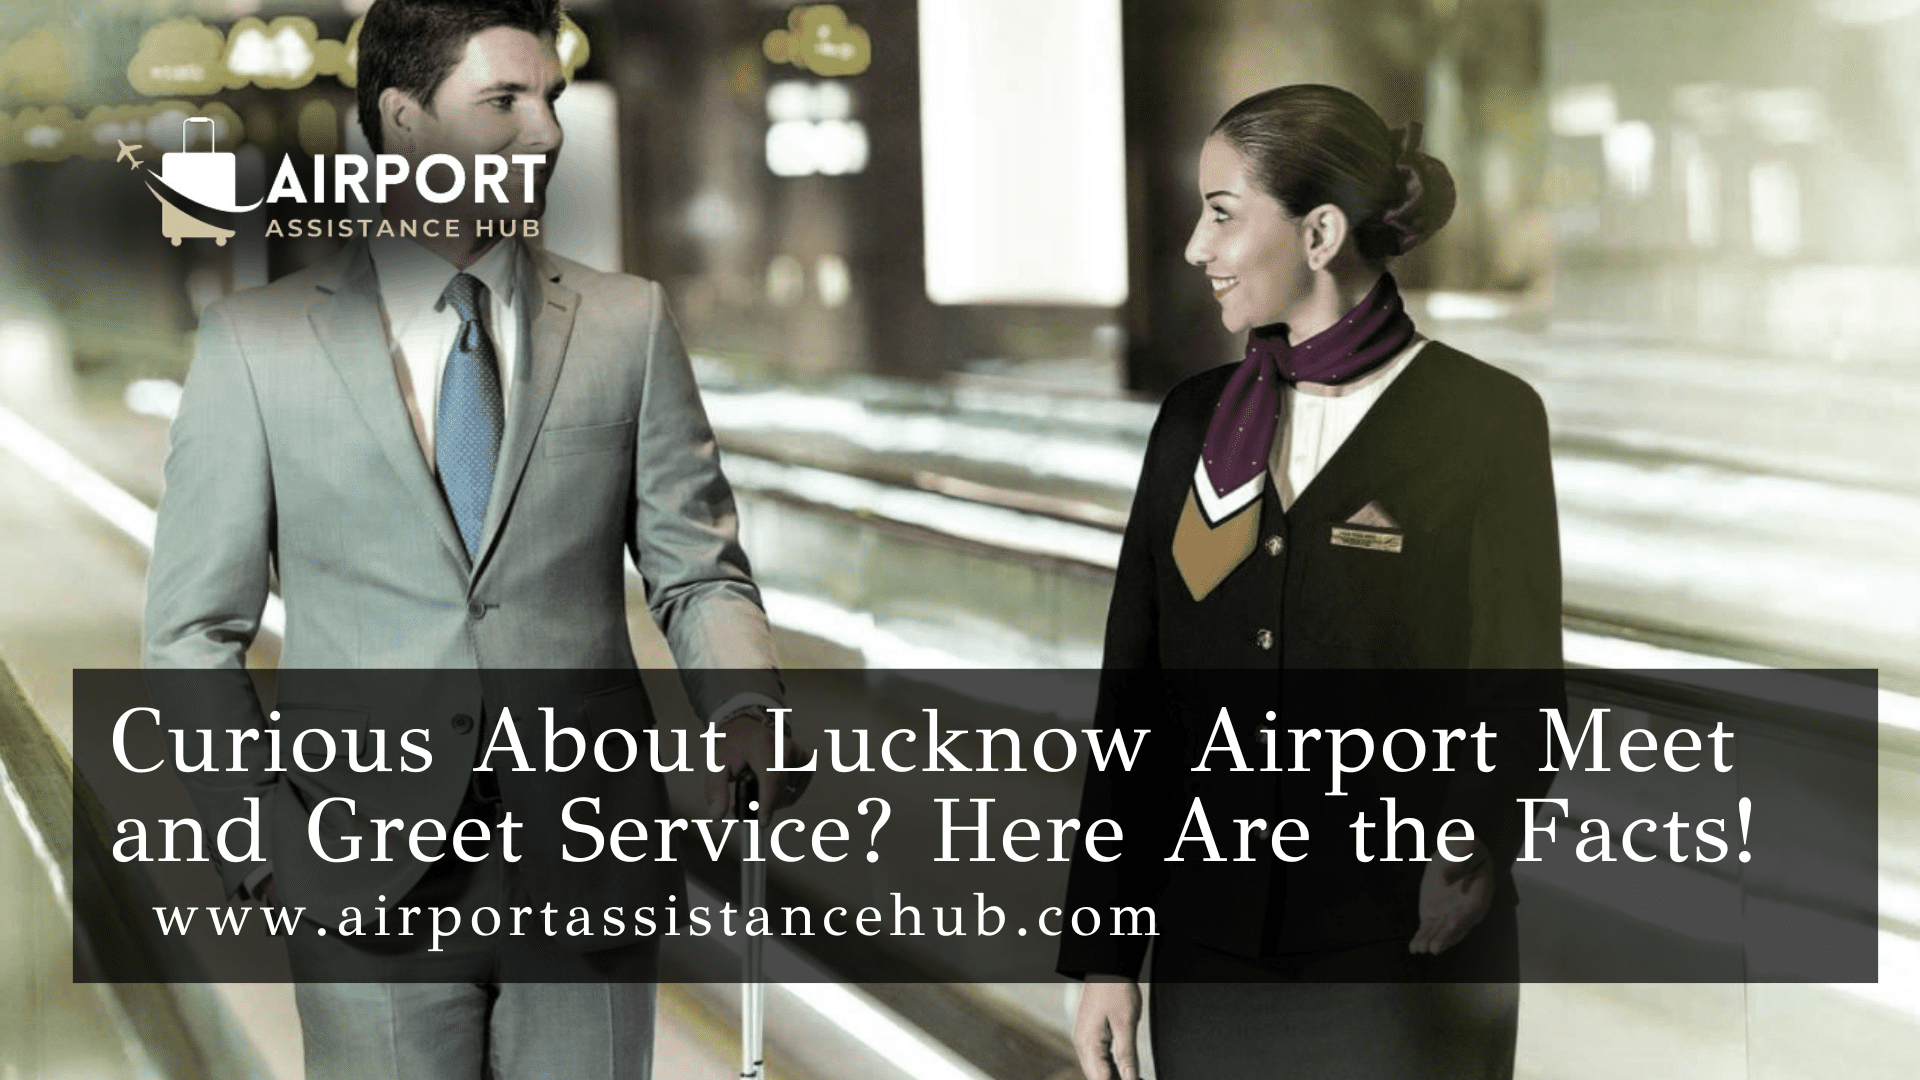 Curious About Lucknow Airport Meet and Greet Service? Here Are the Facts!